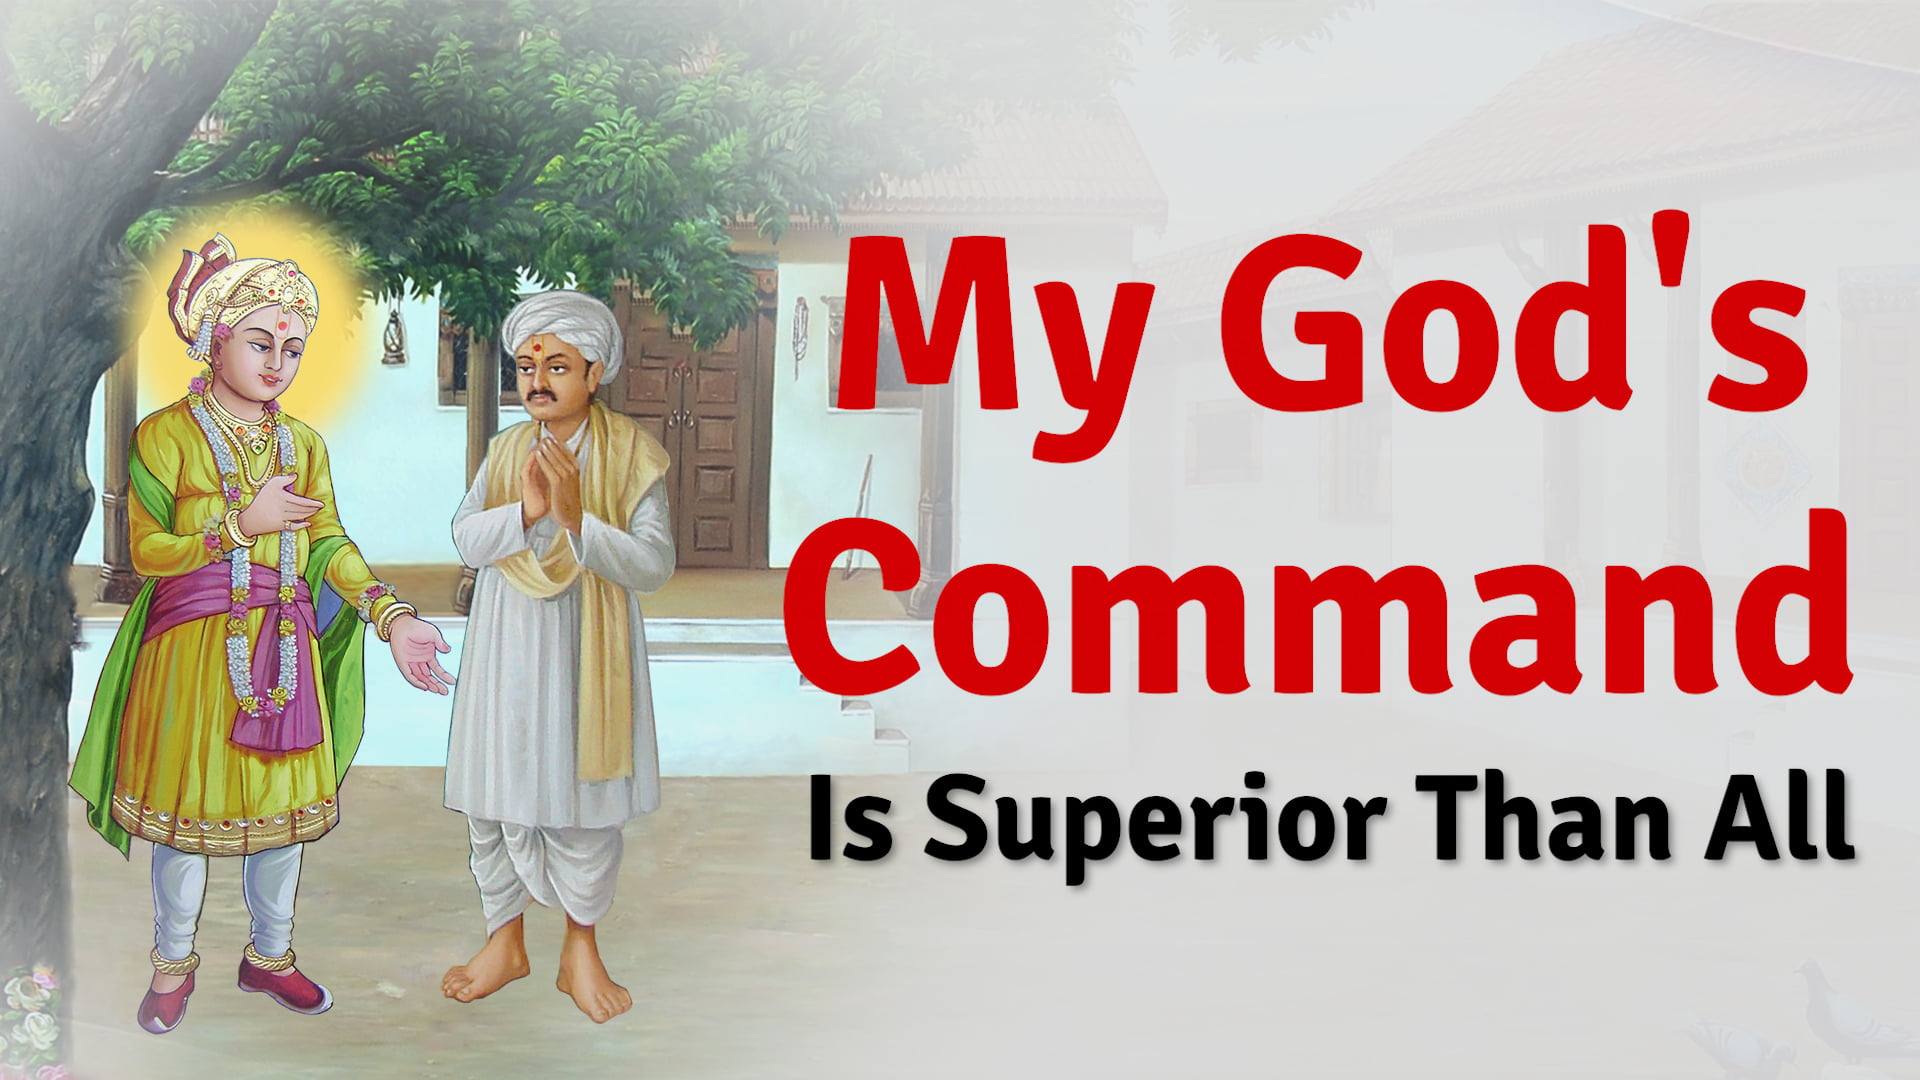 My God’s Command Is Superior Than All – Jiva Joshi from Jetpur